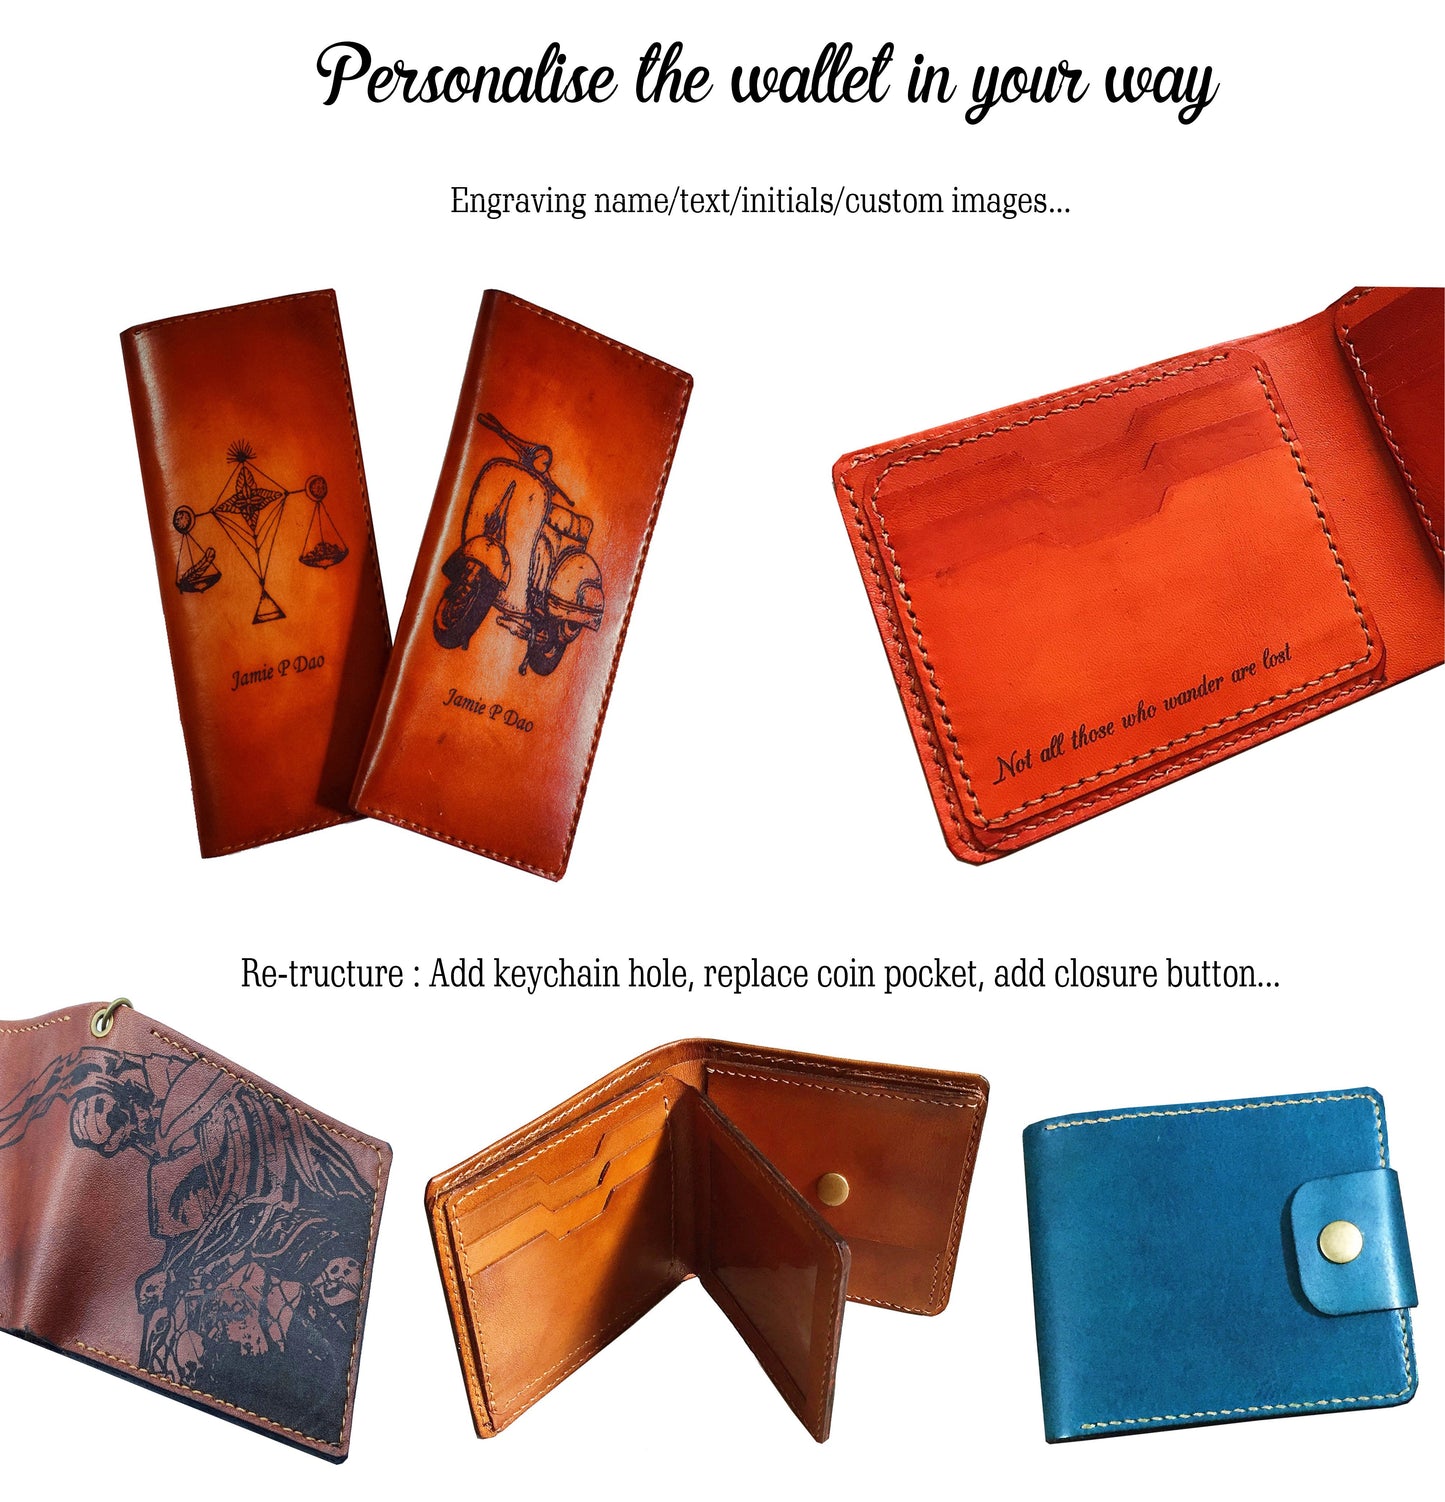 Mayan Corner - T-rex skeleton dinosaurus fossil leather handmade men's wallet, custom gifts for him, father's day gifts, anniversary gift for men